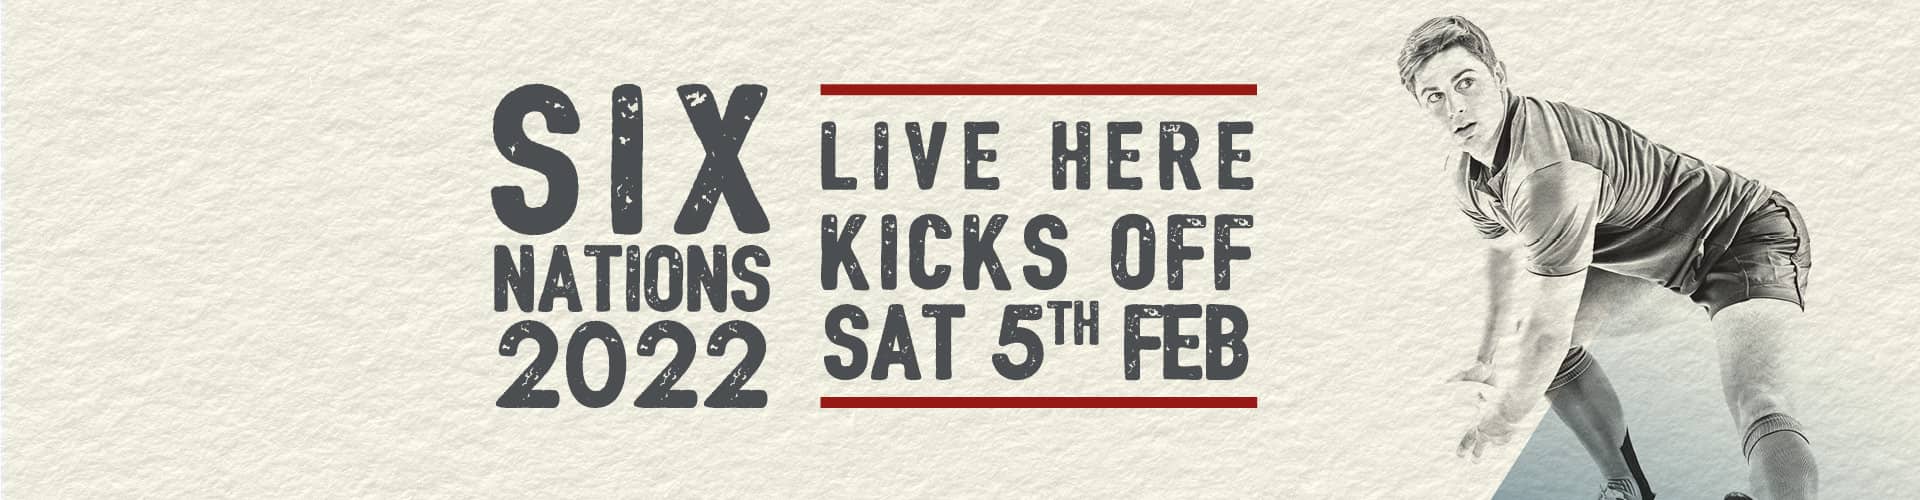 Watch the Six Nations live at Queens Head